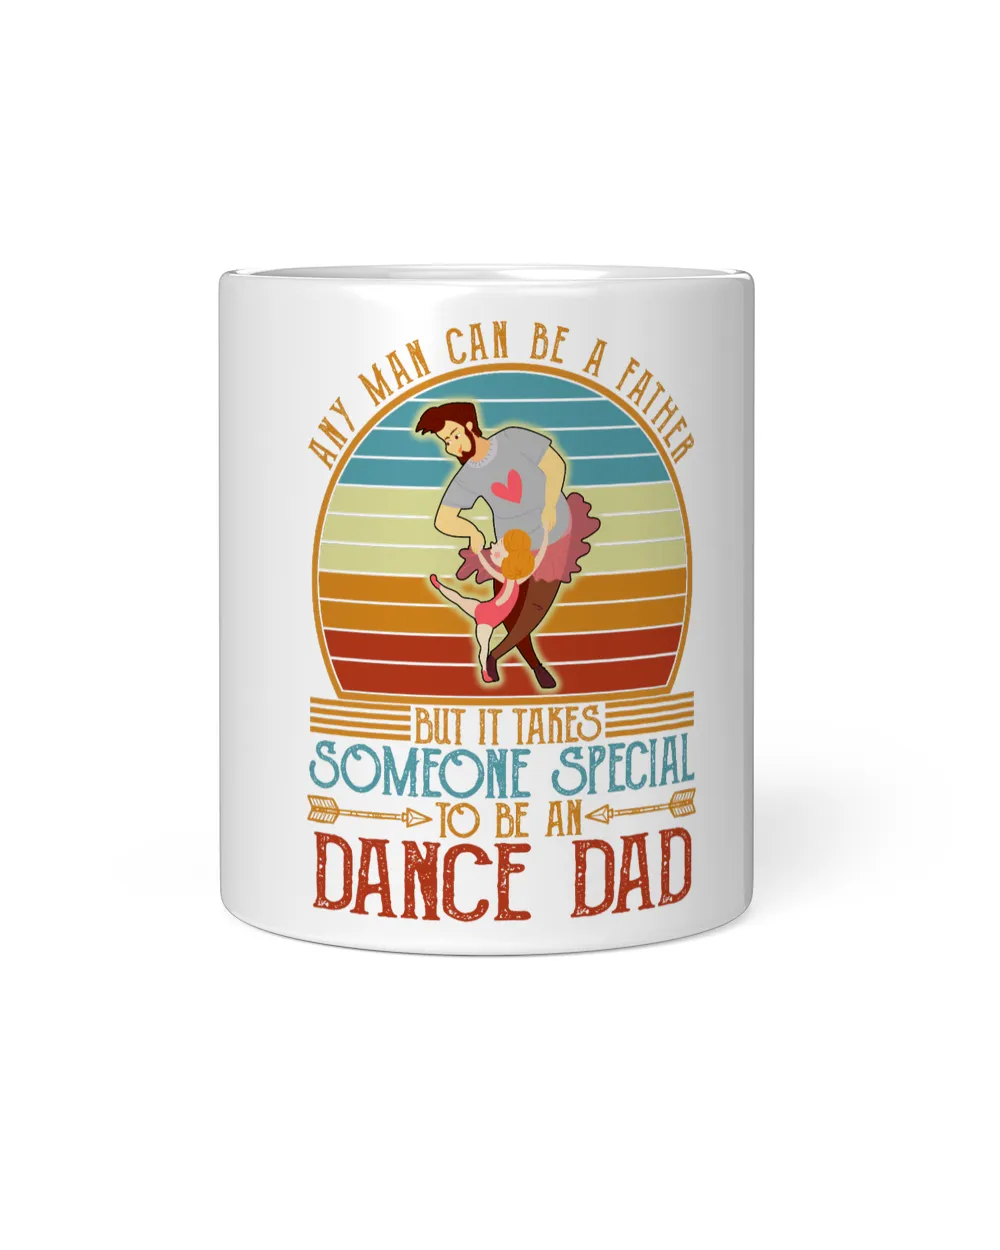 Any man can be a father but it takes someone speacial to be an dance dad